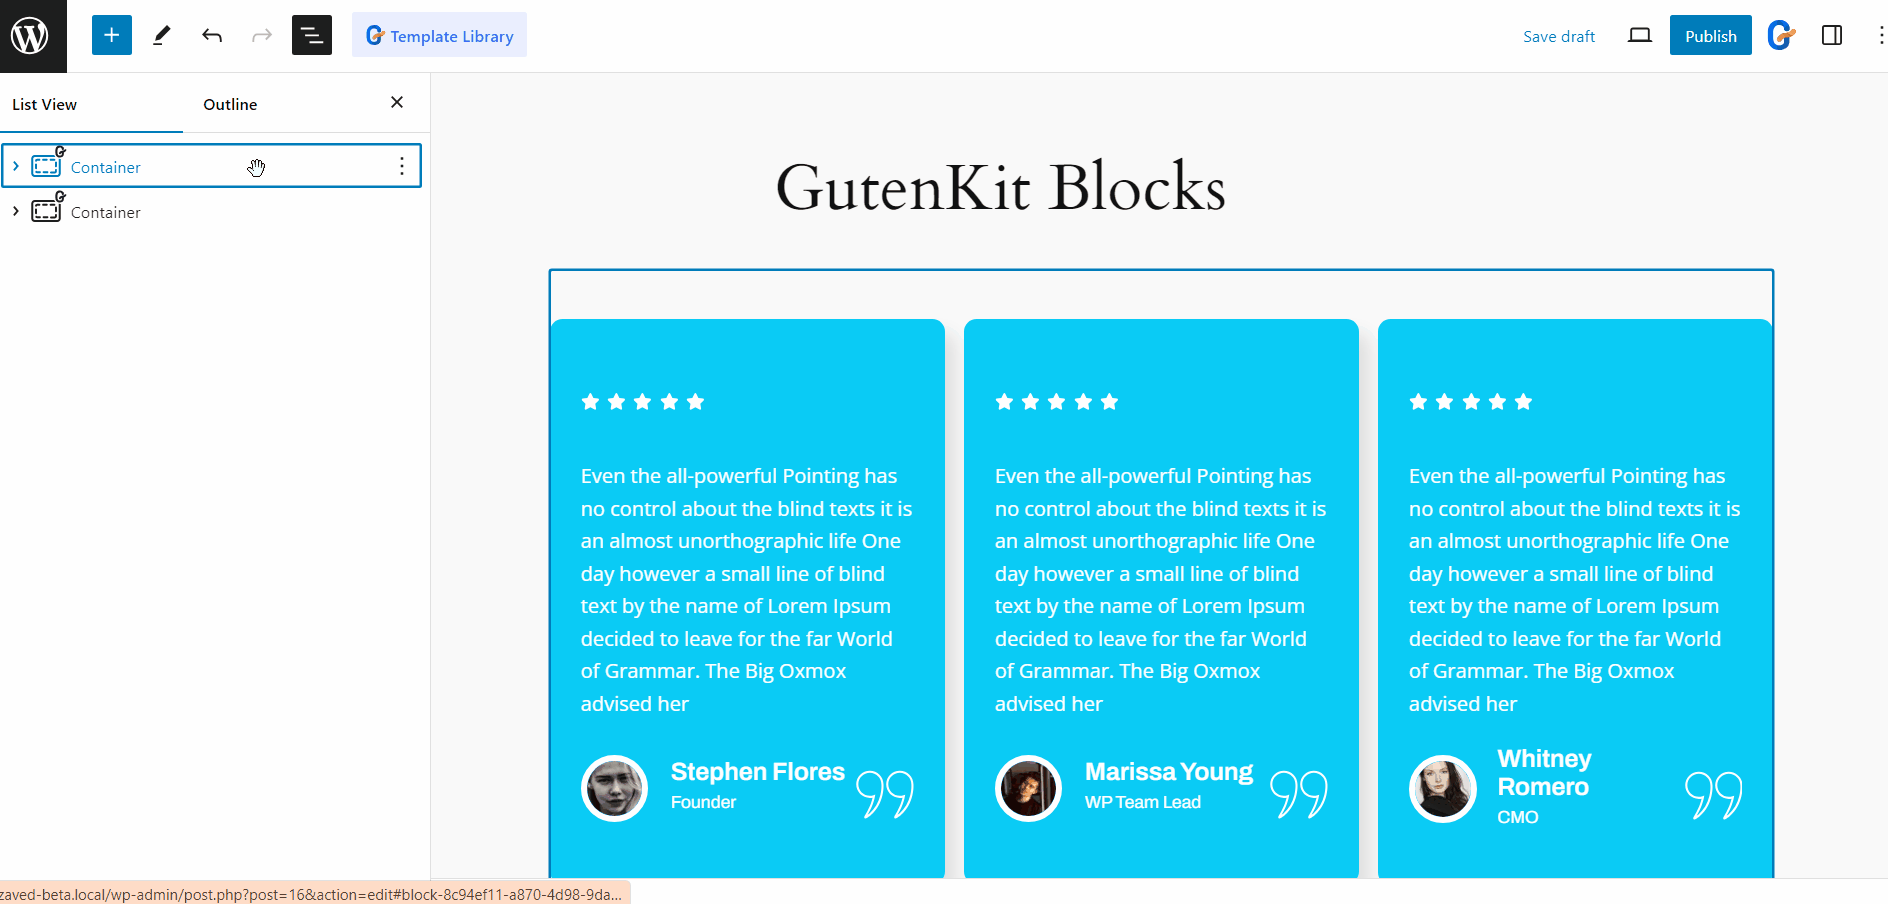 Copy style from exiting Gutenberg blocks